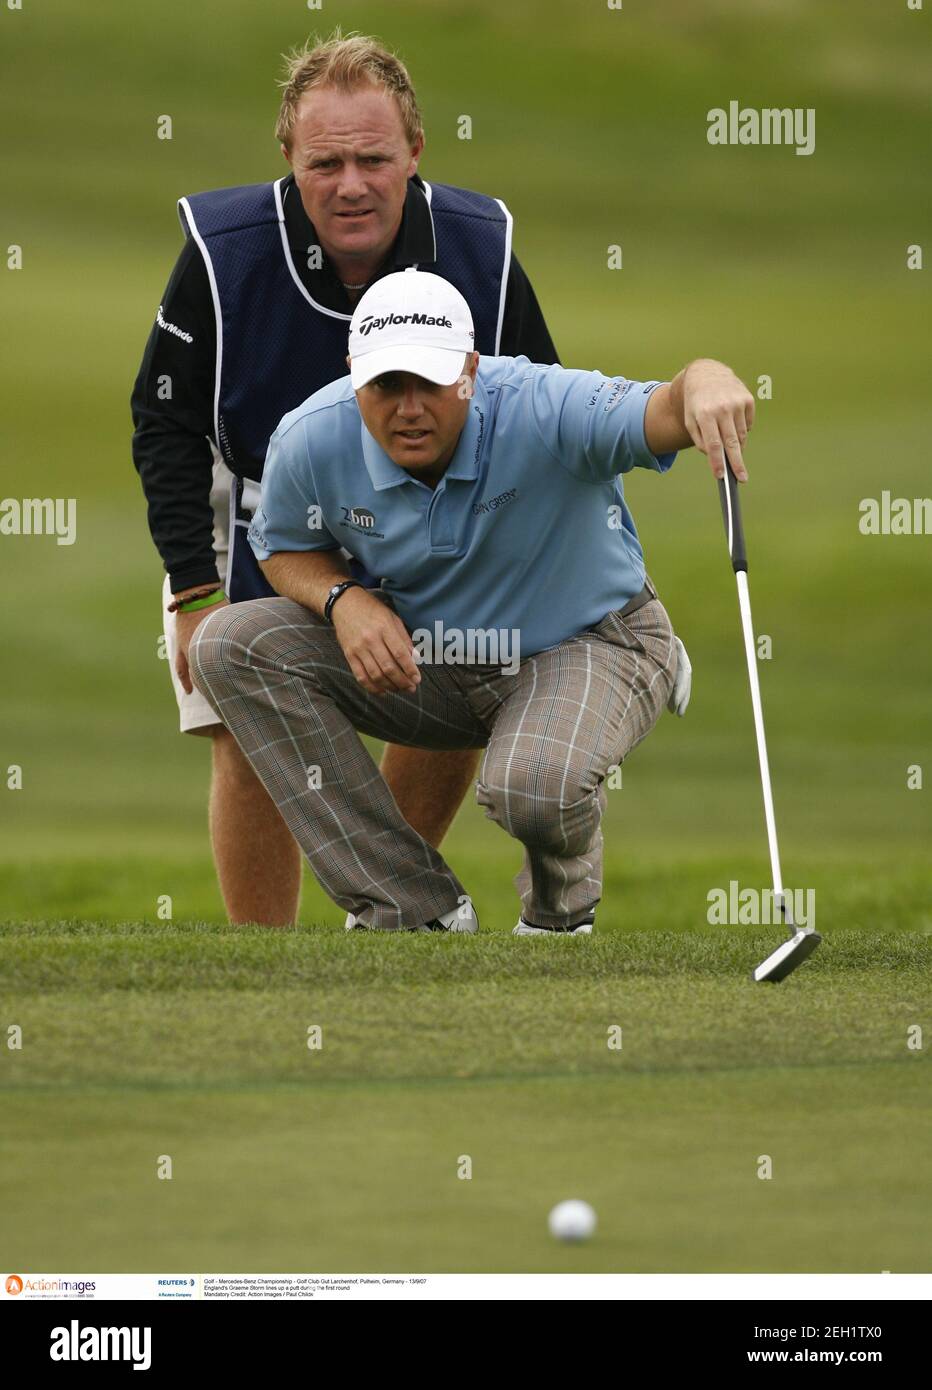 Golf - Mercedes-Benz Championship - Golf Club Gut Larchenhof, Pulheim,  Germany - 13/9/07 England's Graeme Storm lines up a putt during the first  round Mandatory Credit: Action Images / Paul Childs Stock Photo - Alamy